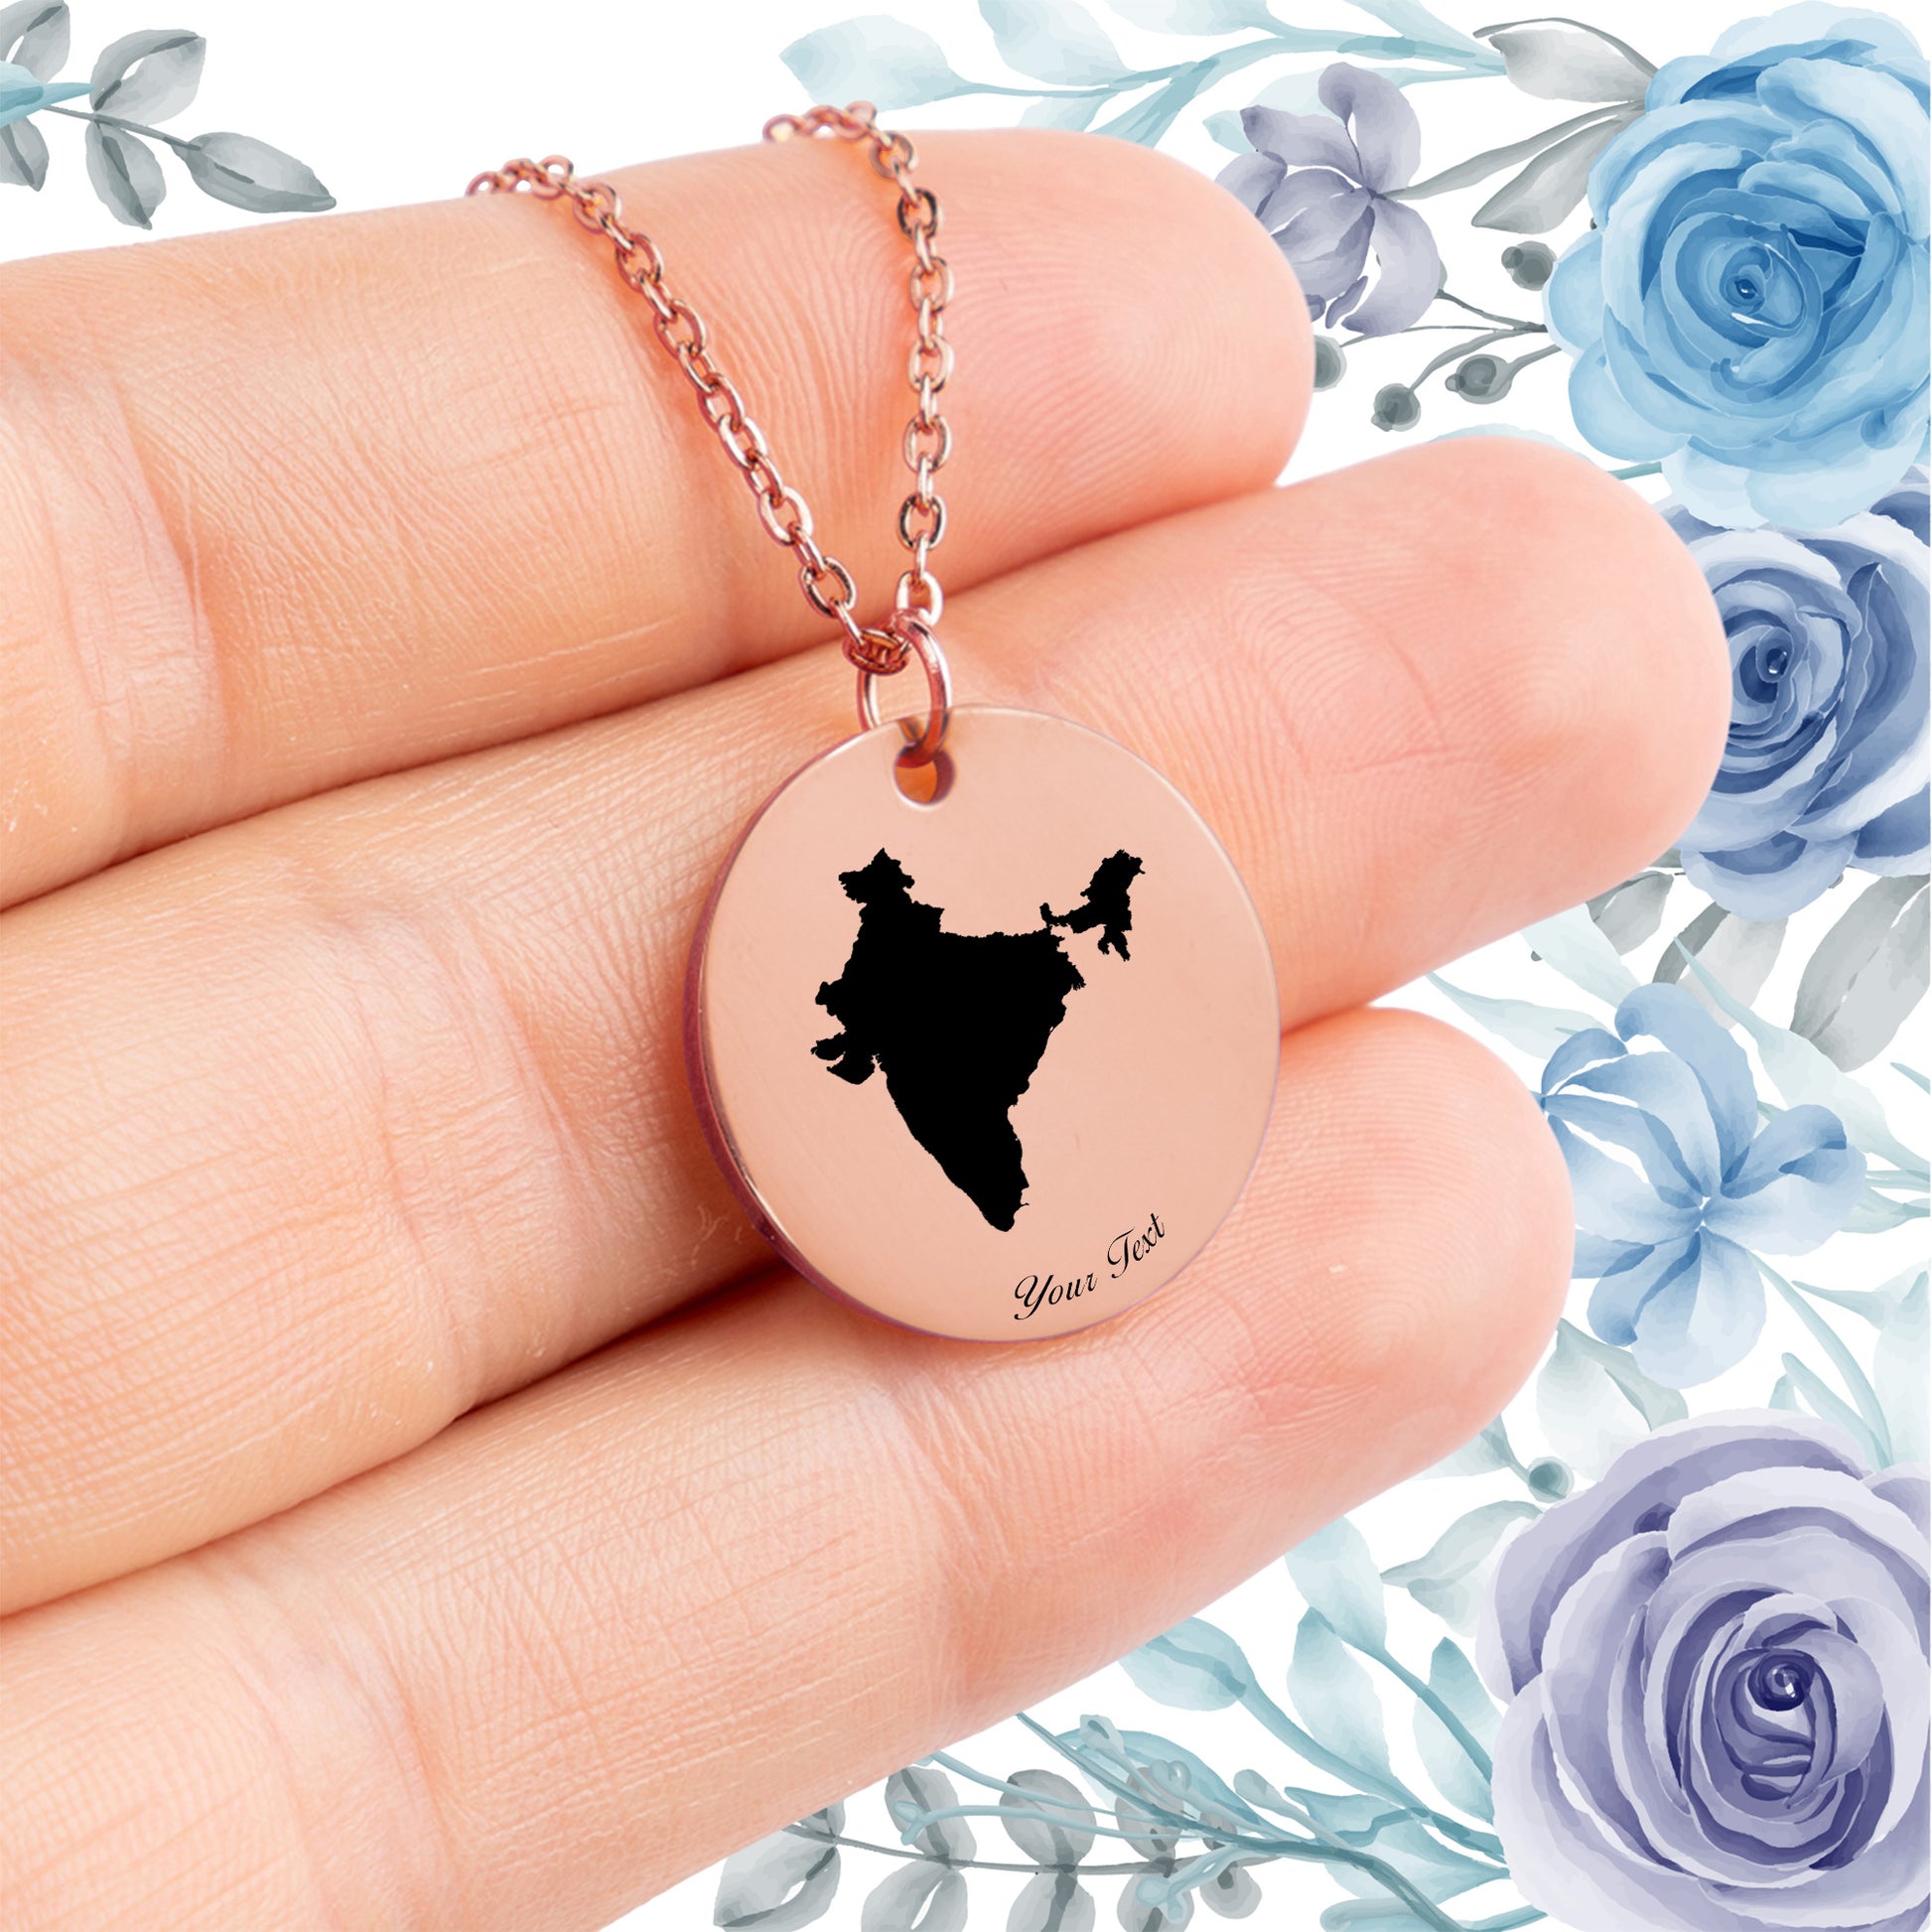 India Country Map Necklace - Personalizable Jewelry